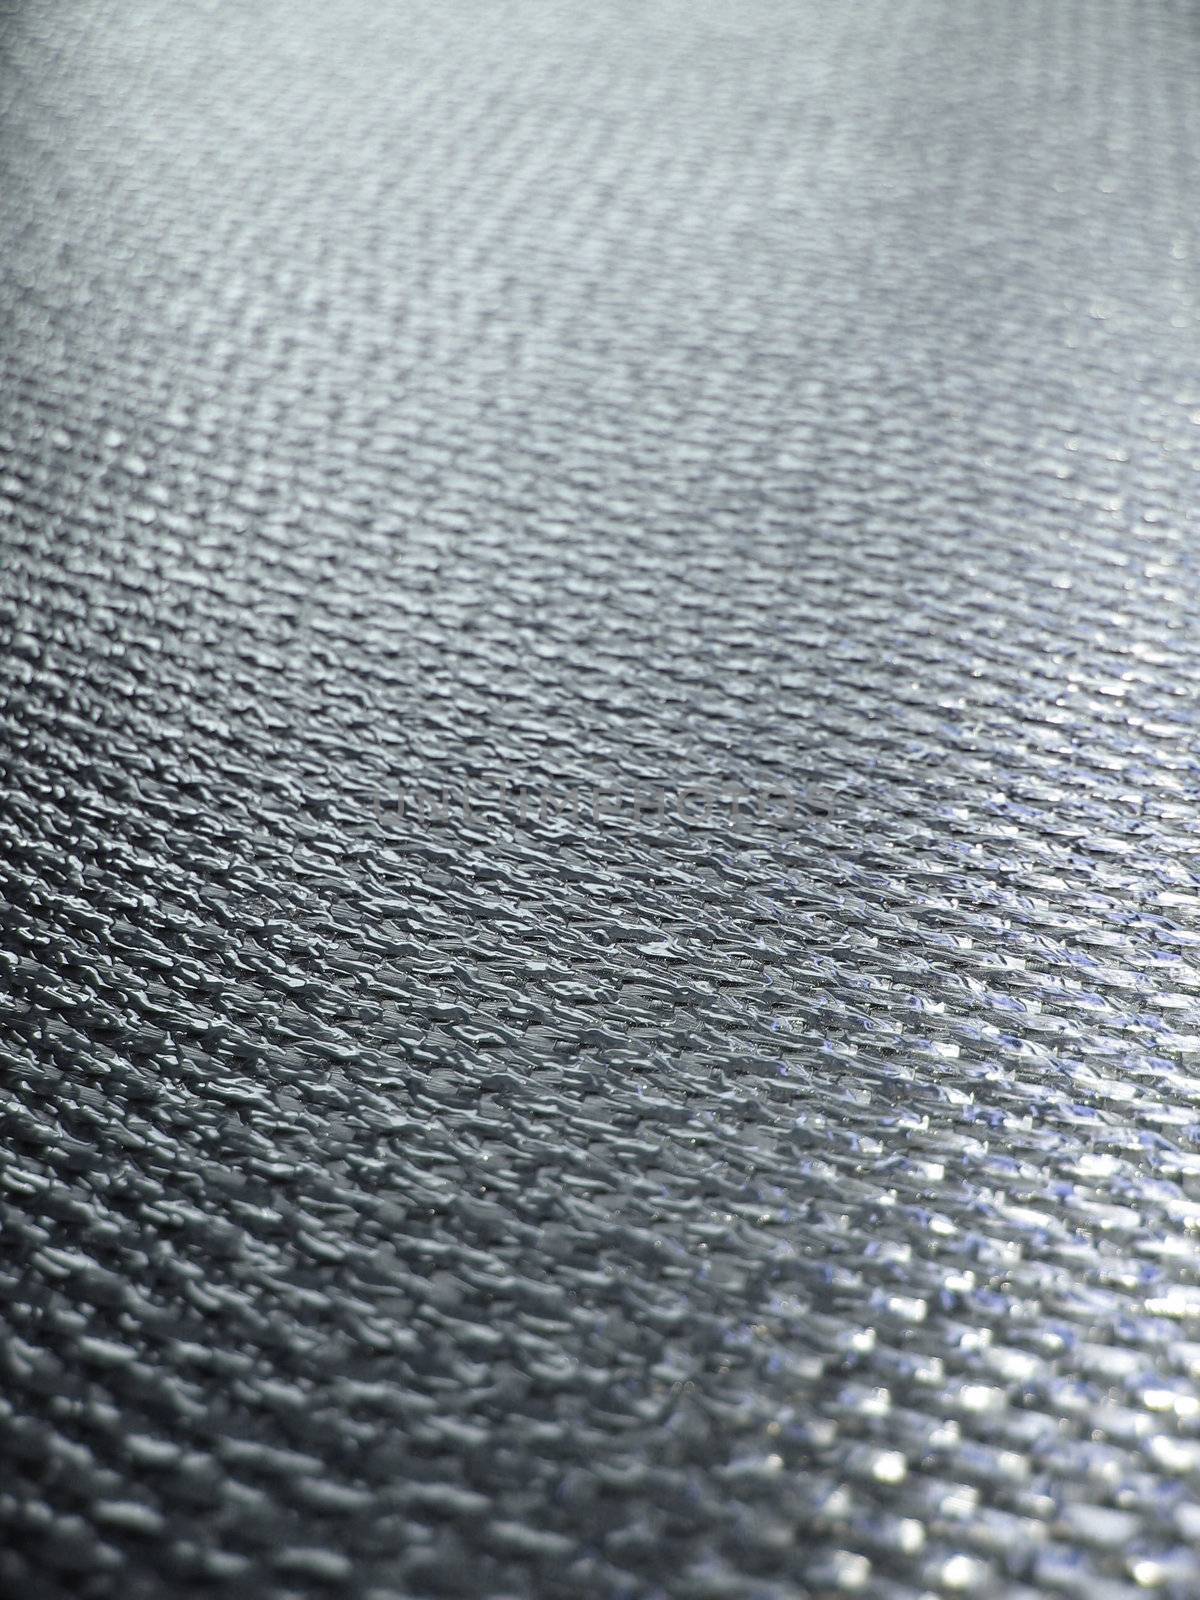 Real carbon fiber in its raw form - this is the material that is used to make durable and strong parts for cars, boats, bikes and more. Shallow depth of field.